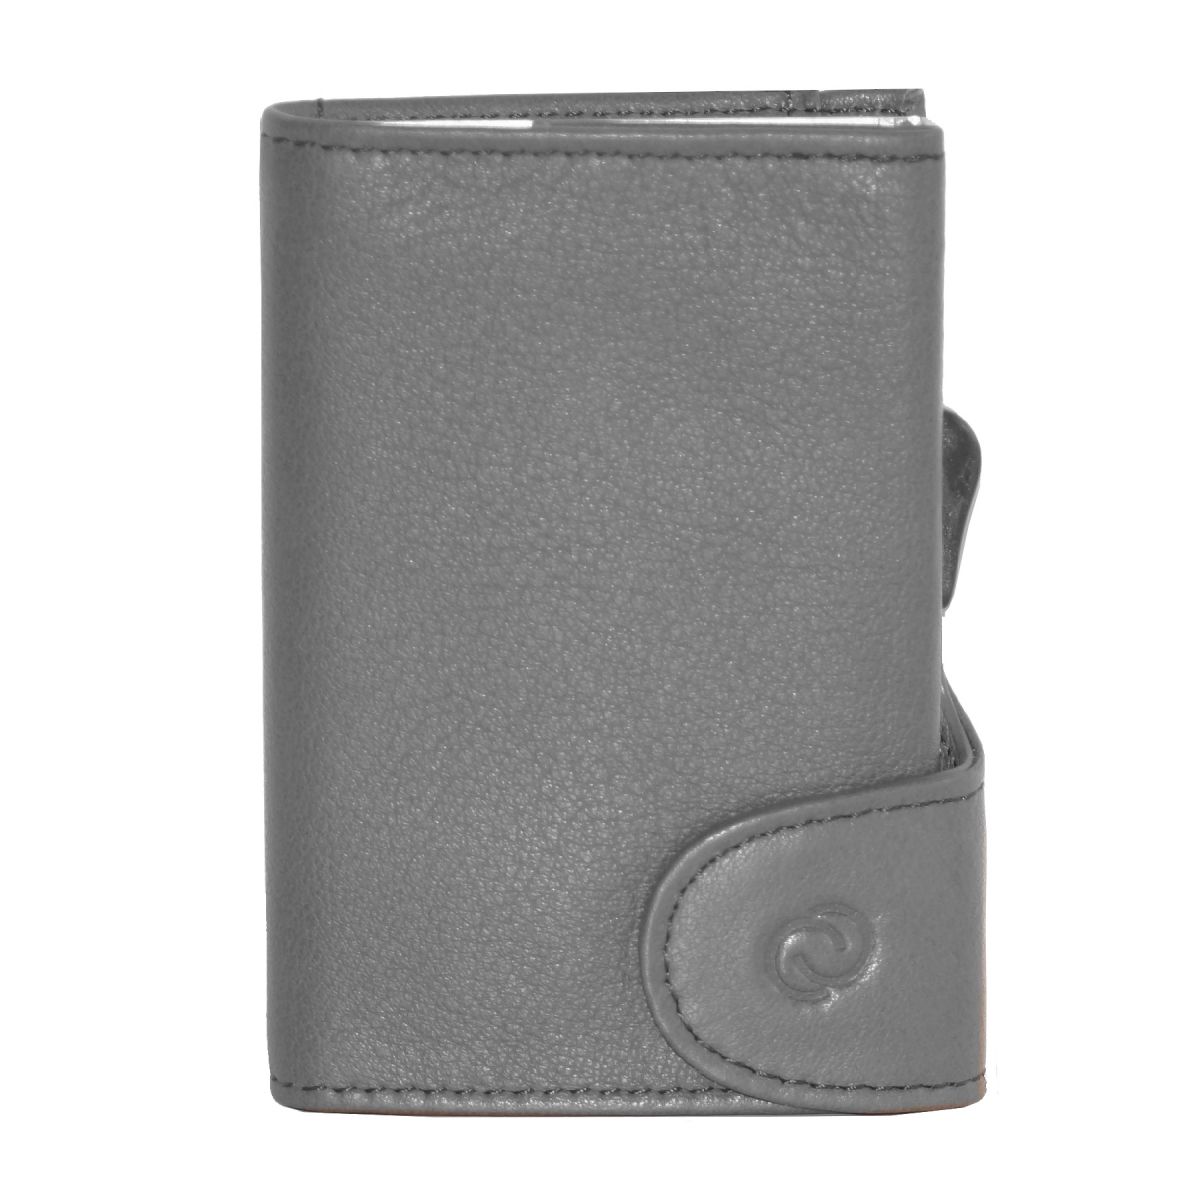 C-Secure Aluminum Card Holder with PU Leather with Coin Pouch - Grey